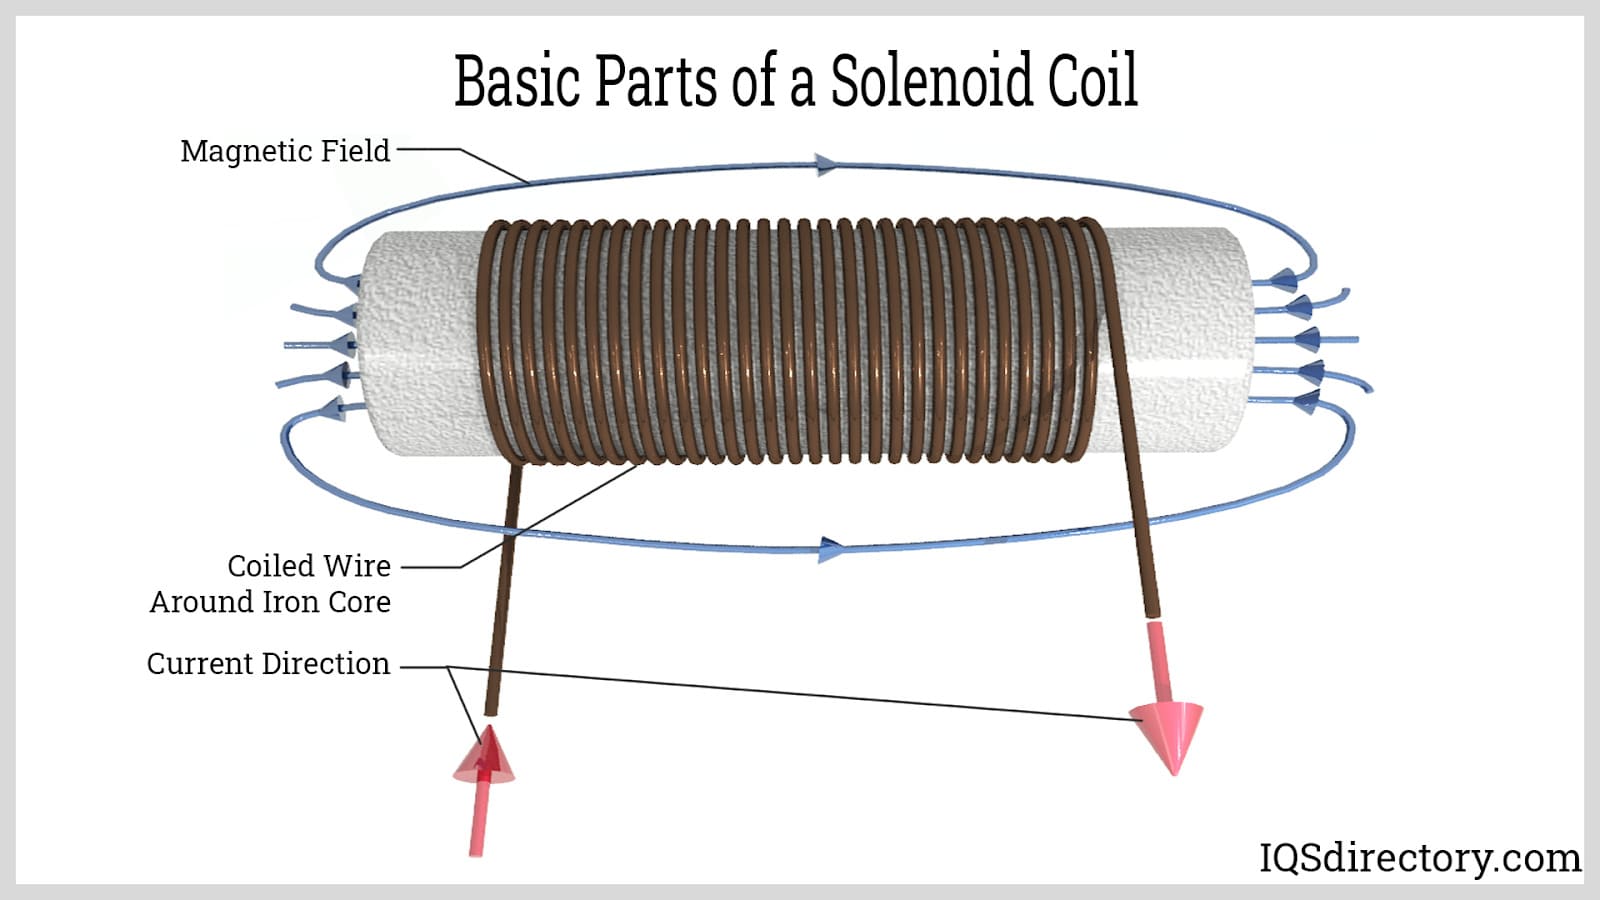 Basic Parts of a Solenoid Coil